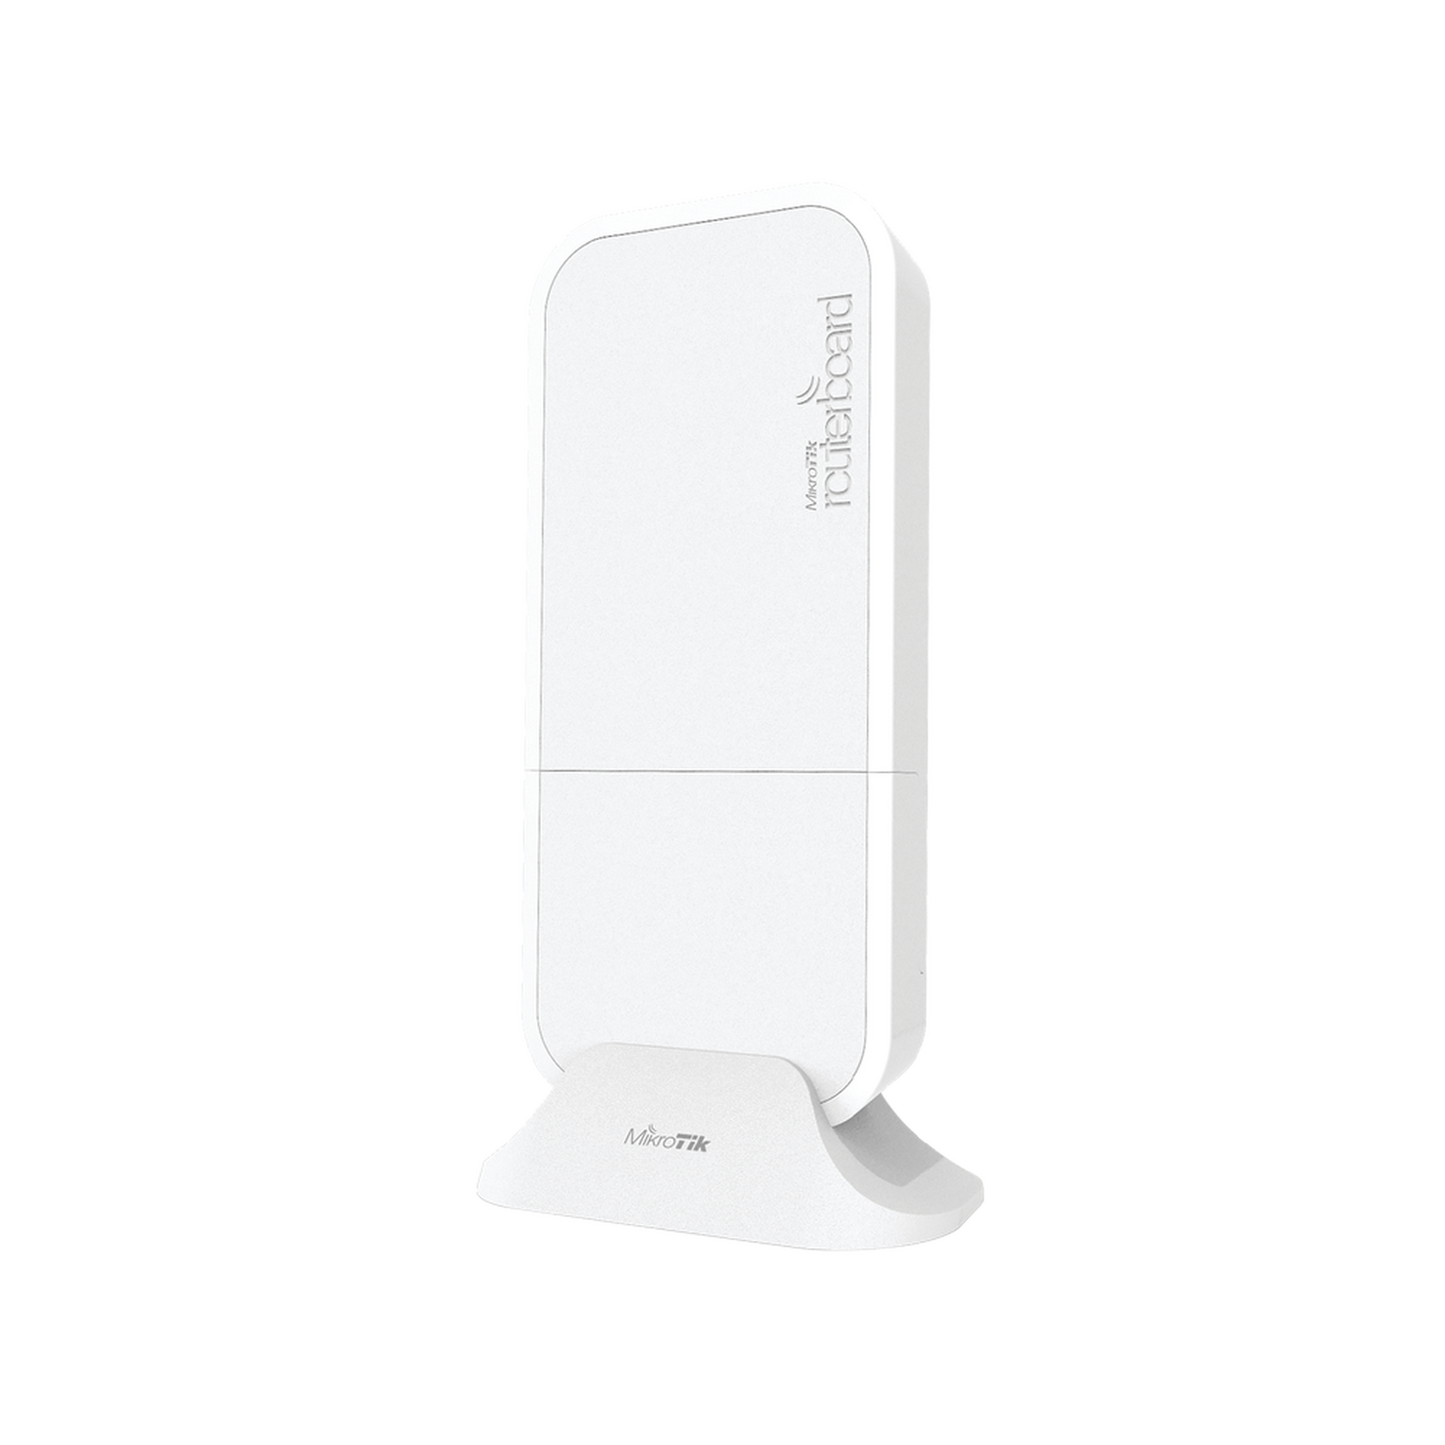 (wAP LTE kit US) Access Point 2.4 GHz 802.11 b/g/n with Modem LTE Bands (2,4,5,12)